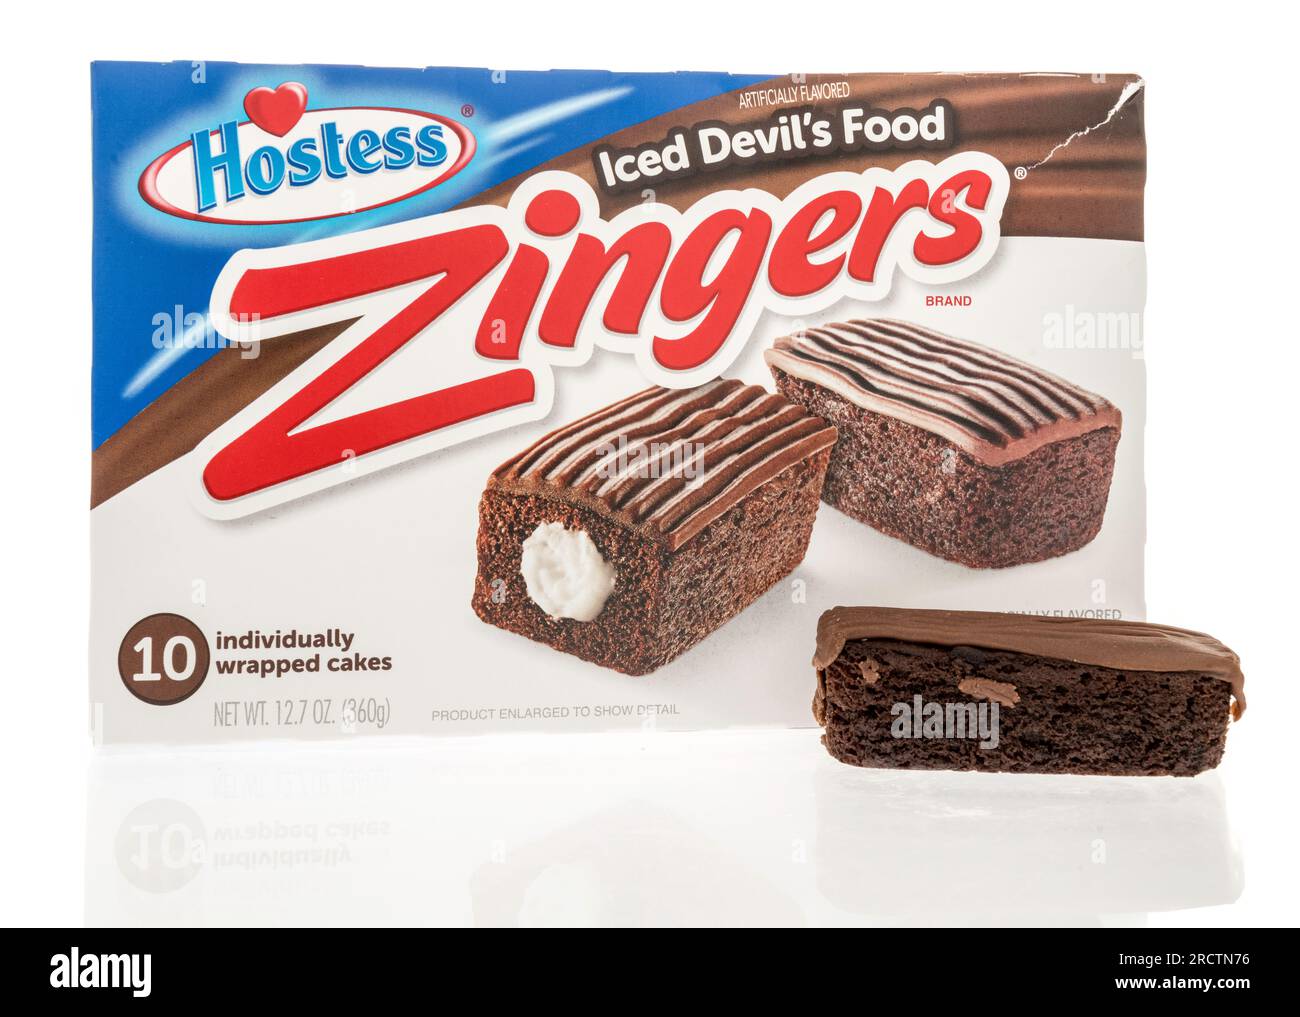 Winneconne, WI - 15 July 2023: A package of Hostess Zingers iced devils food on an isolated background. Stock Photo